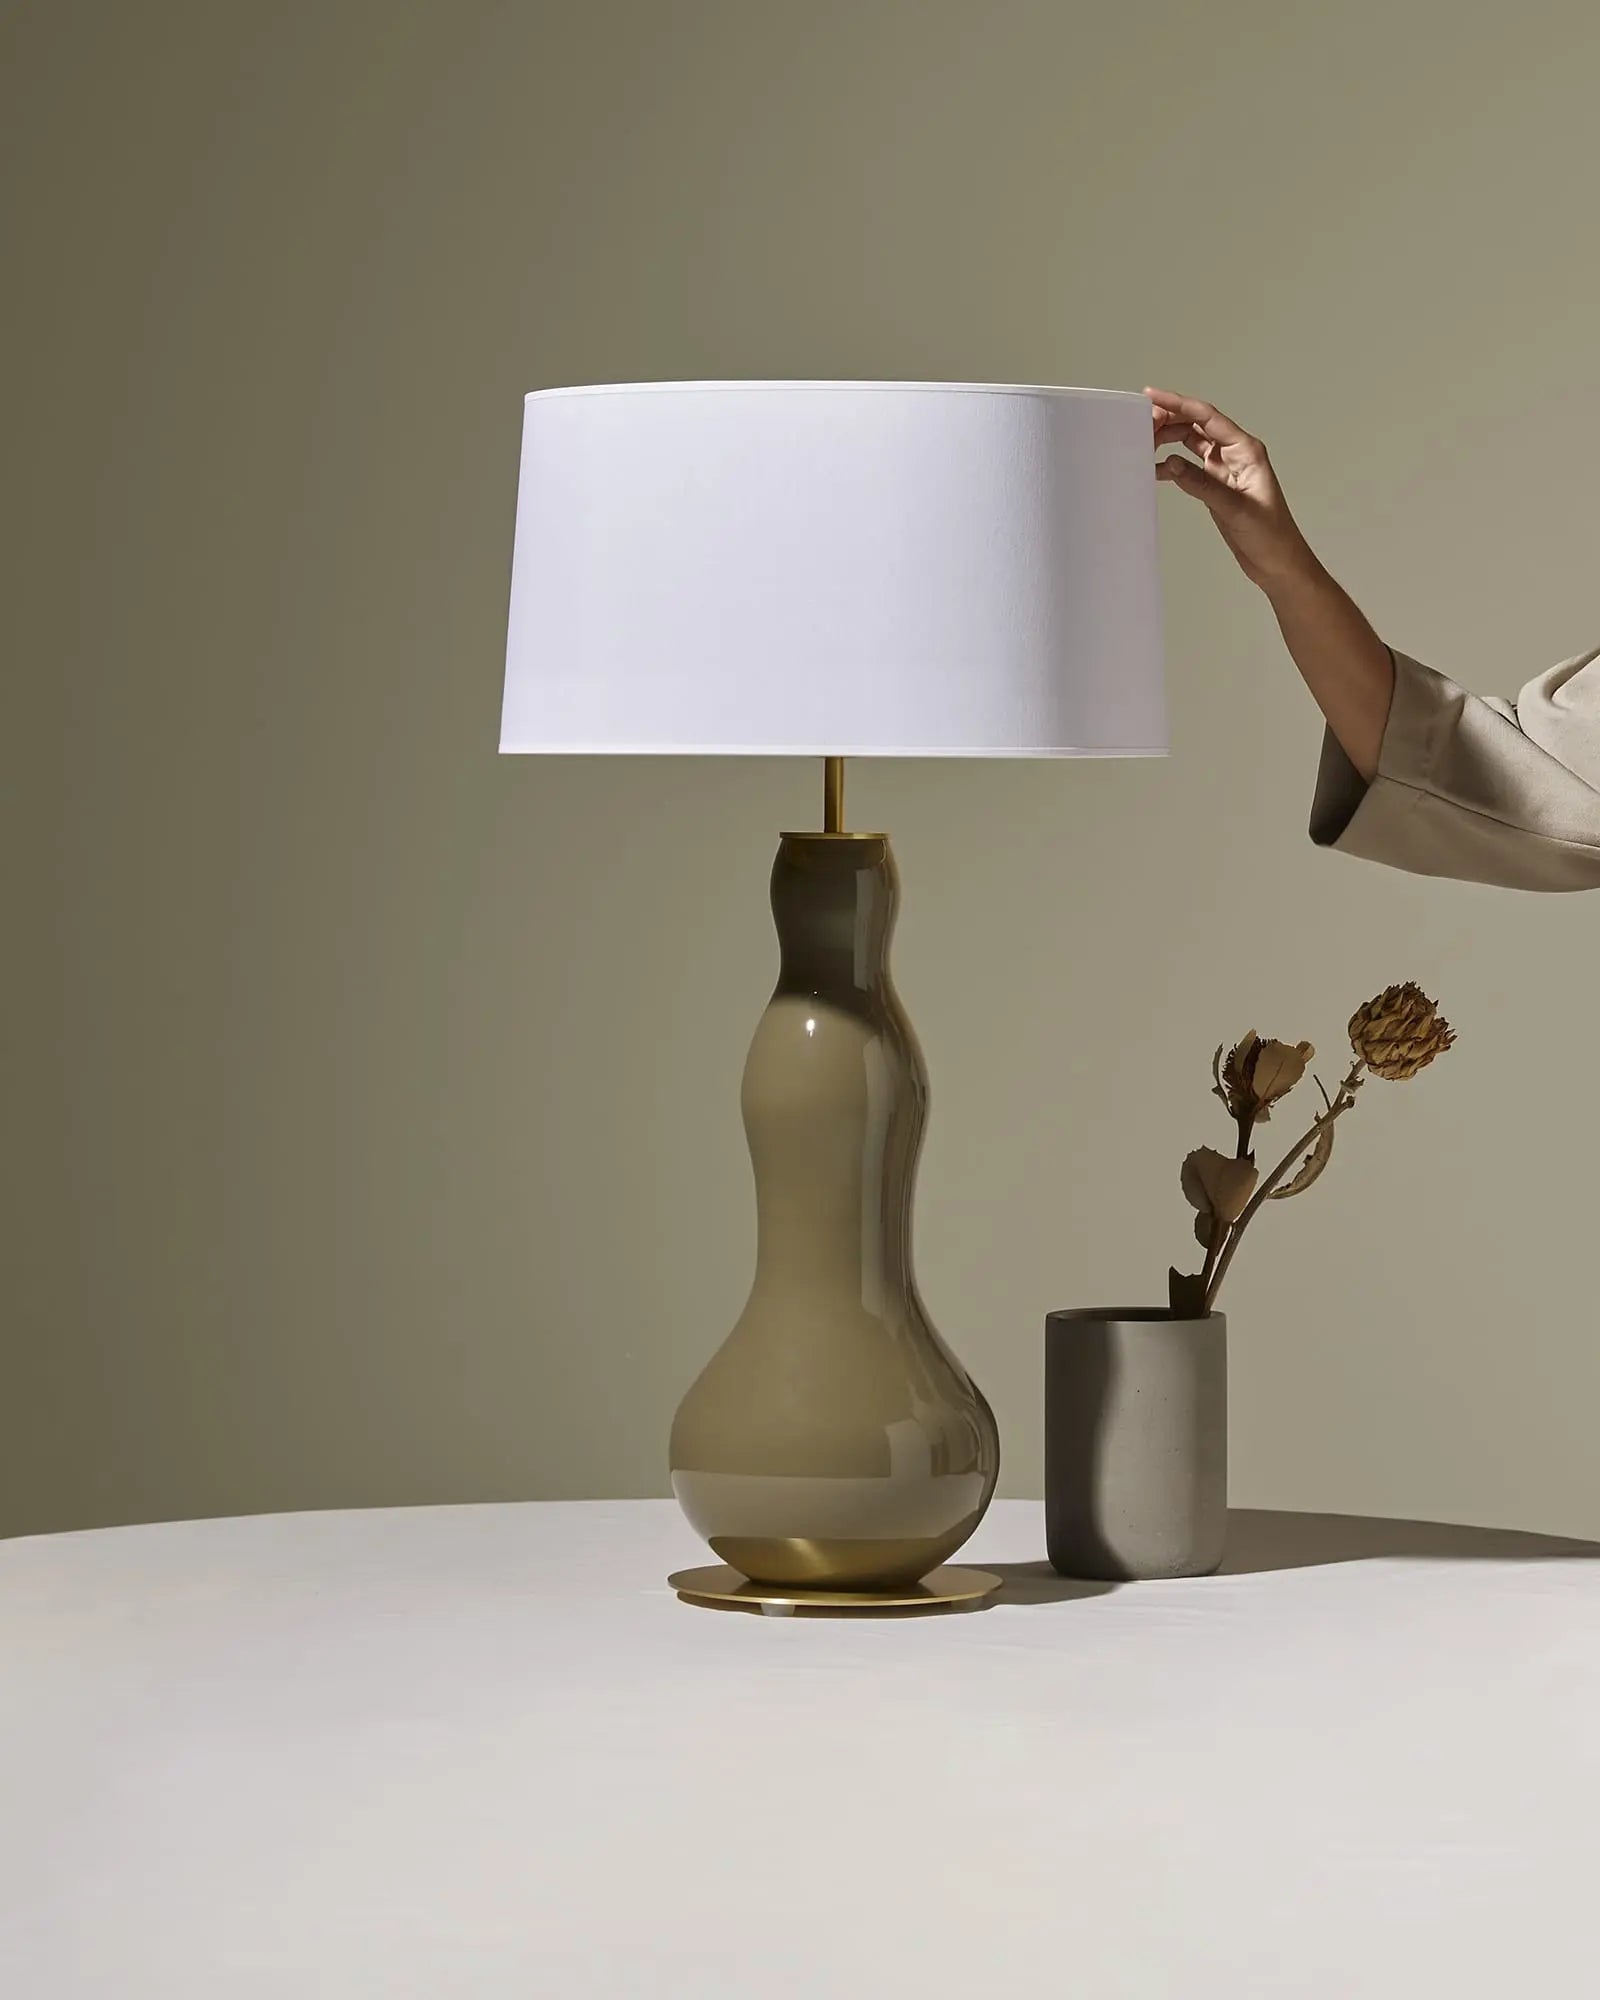 Melly Ceramic decorative table lamp with fabric shade on a table